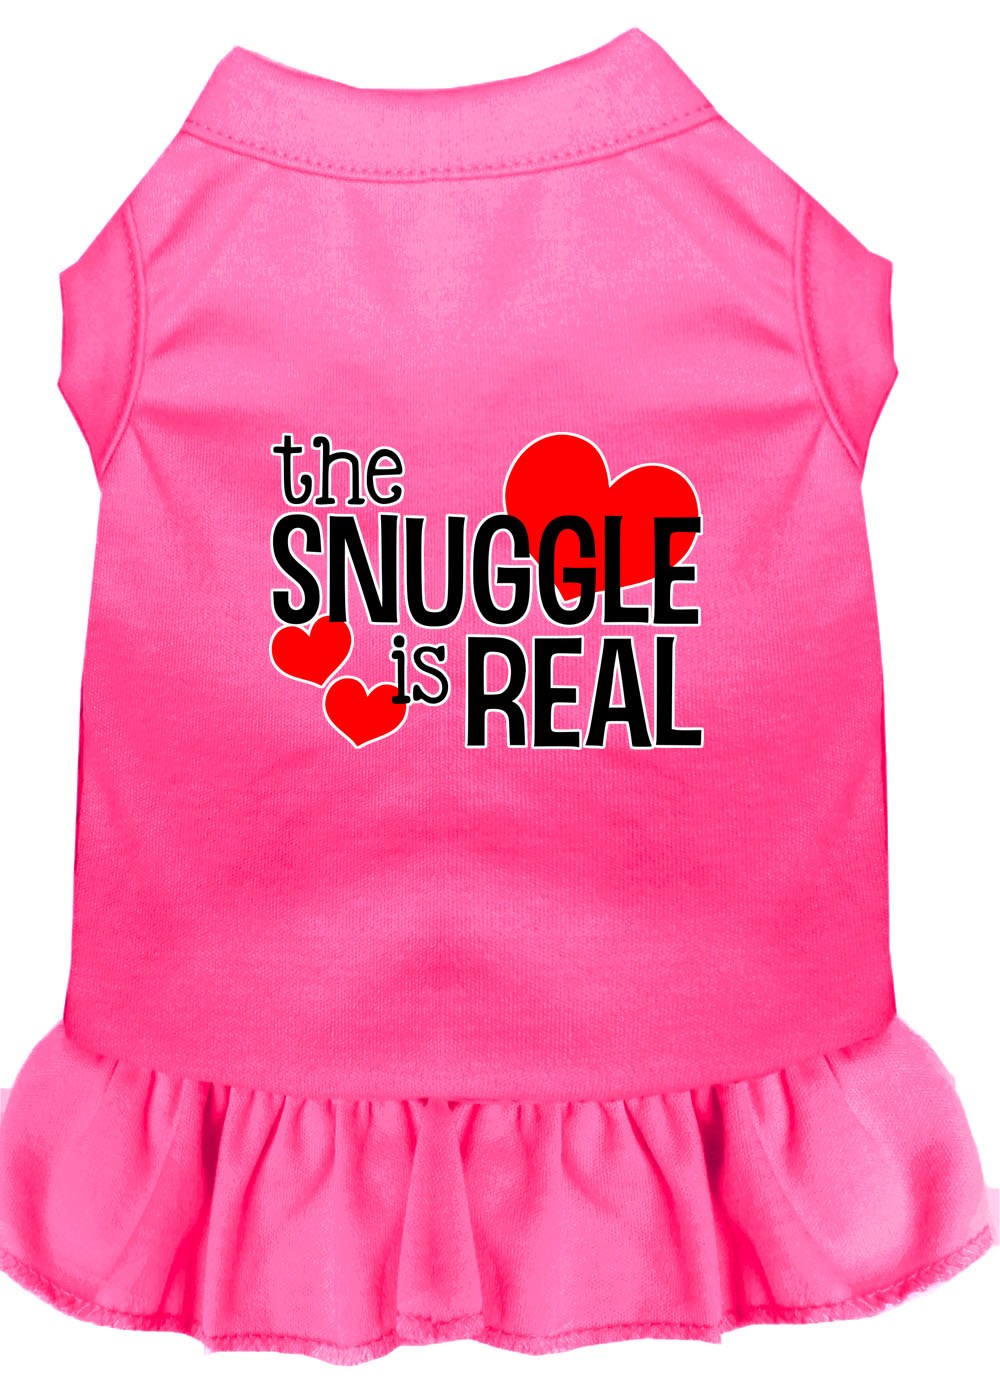 The Snuggle is Real Screen Print Dog Dress Bright Pink 4X